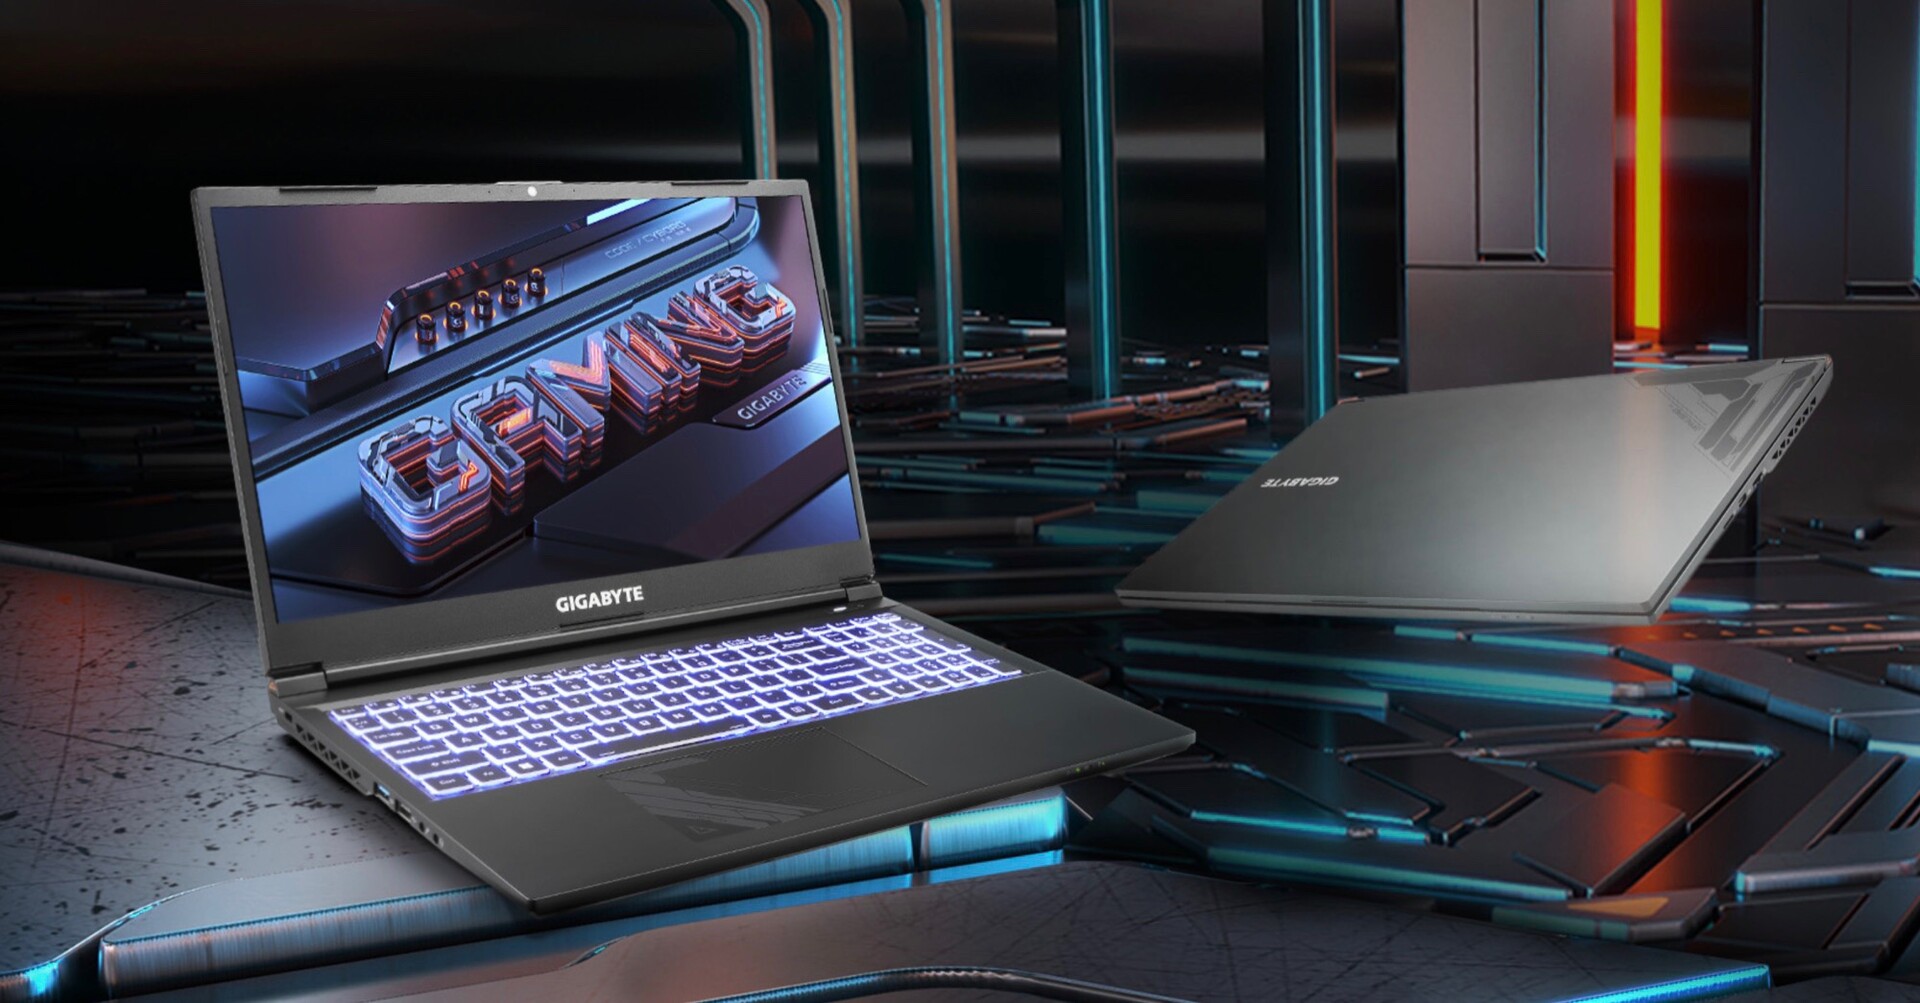 Gigabyte refreshes G5 and G7 gaming laptops with Intel Core i5-12500H